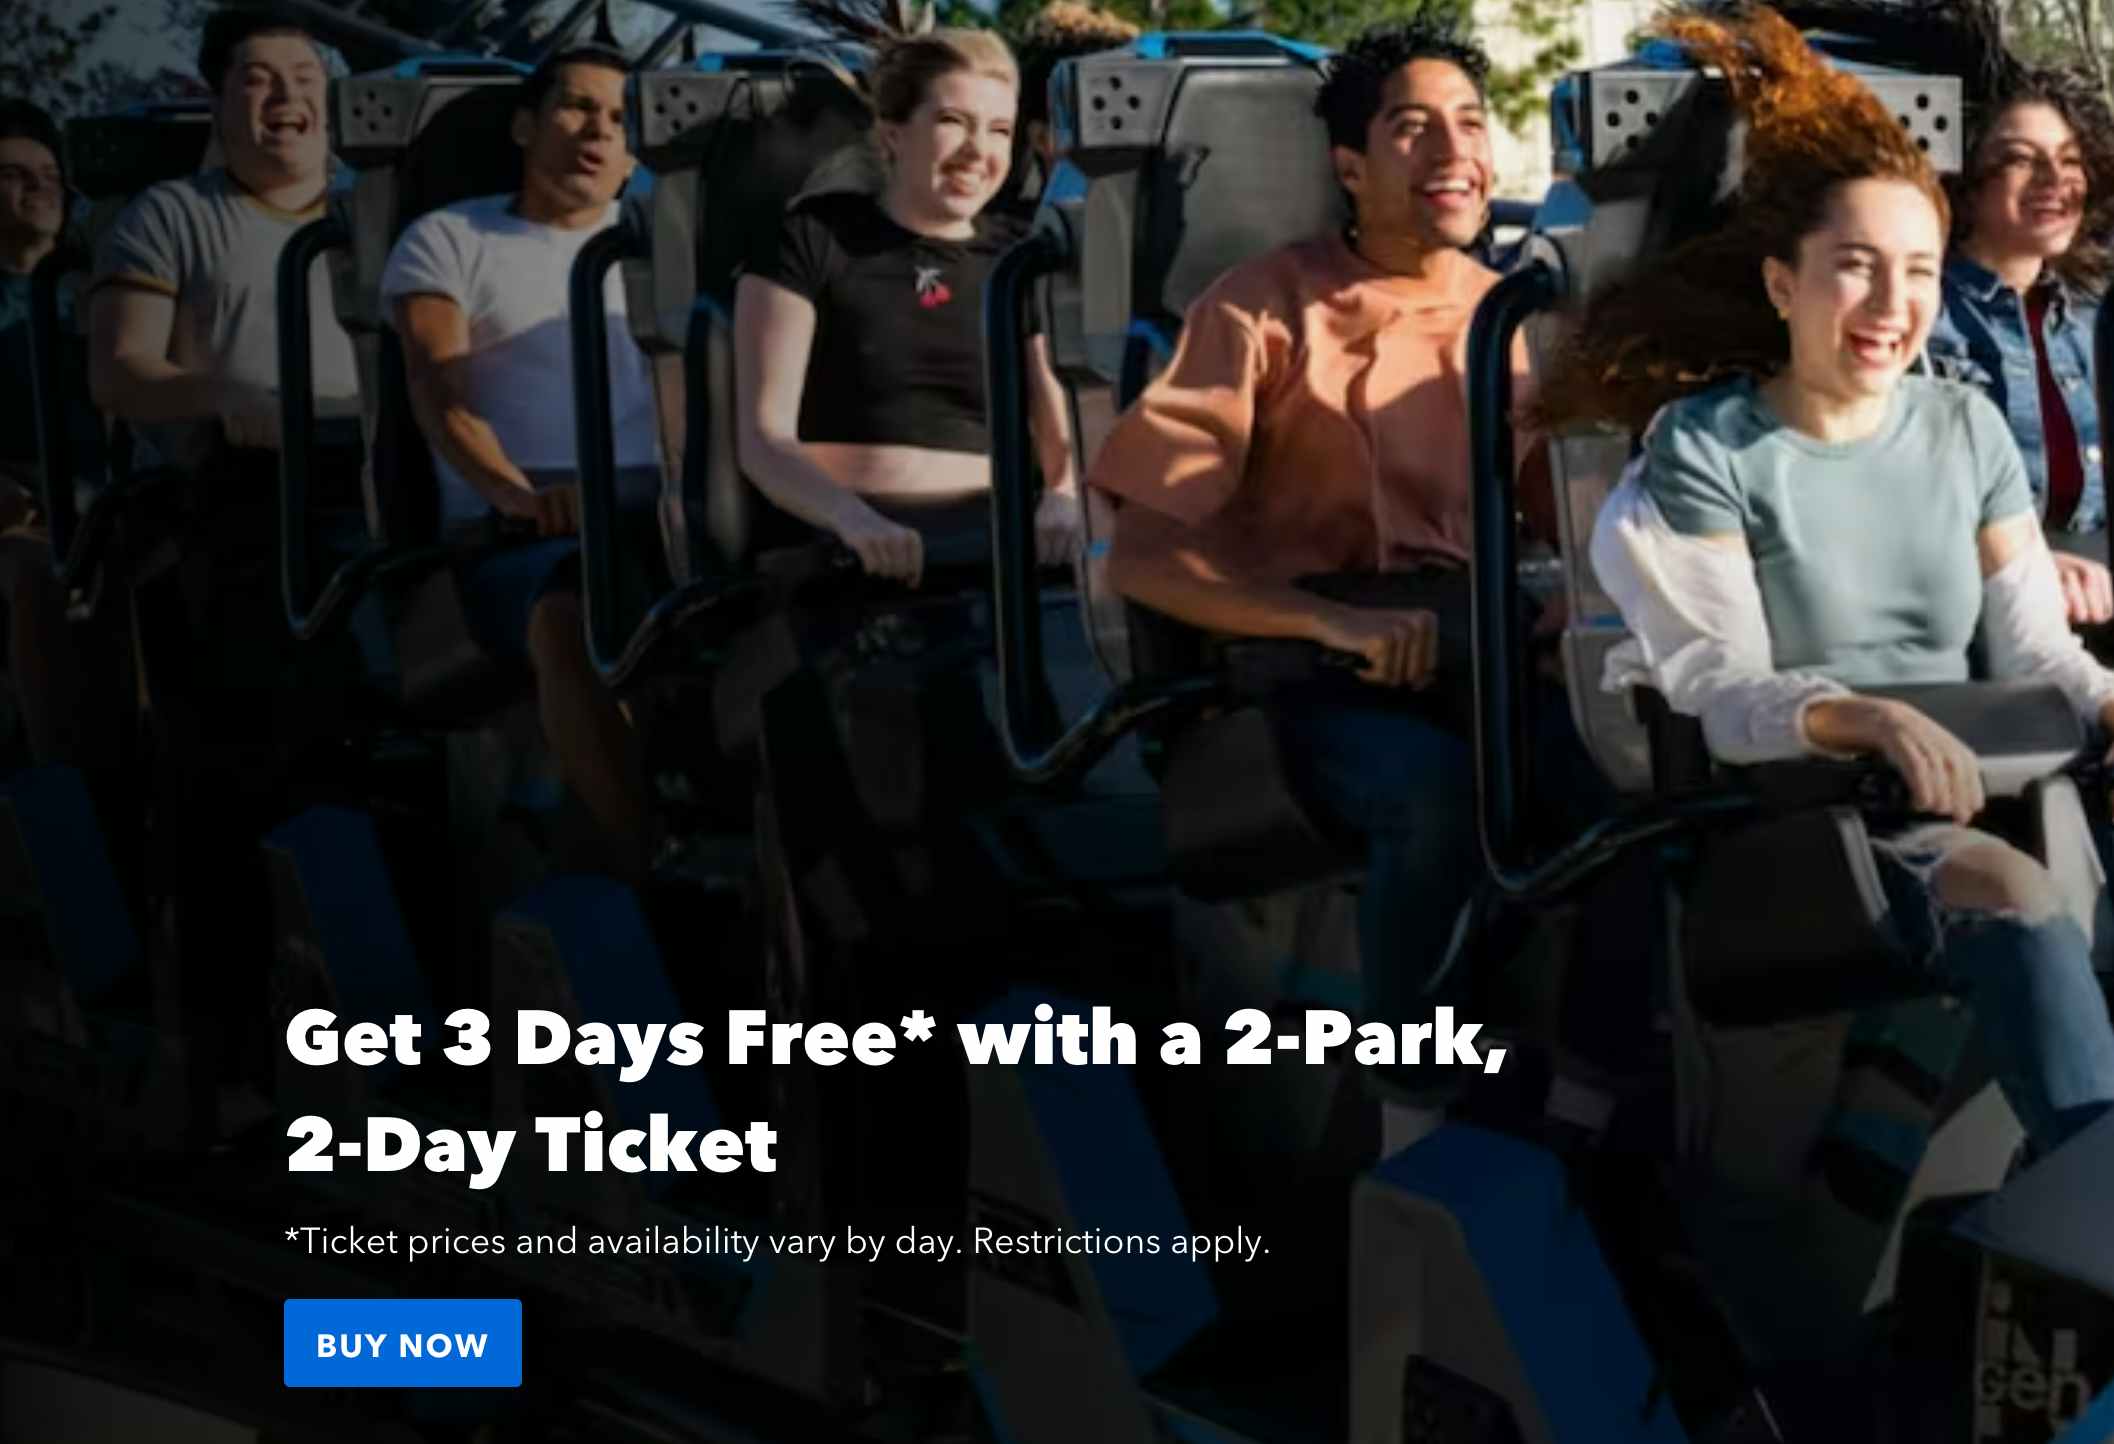 get 3 days free with a 2 park 2 days ticket screenshot from universals website 